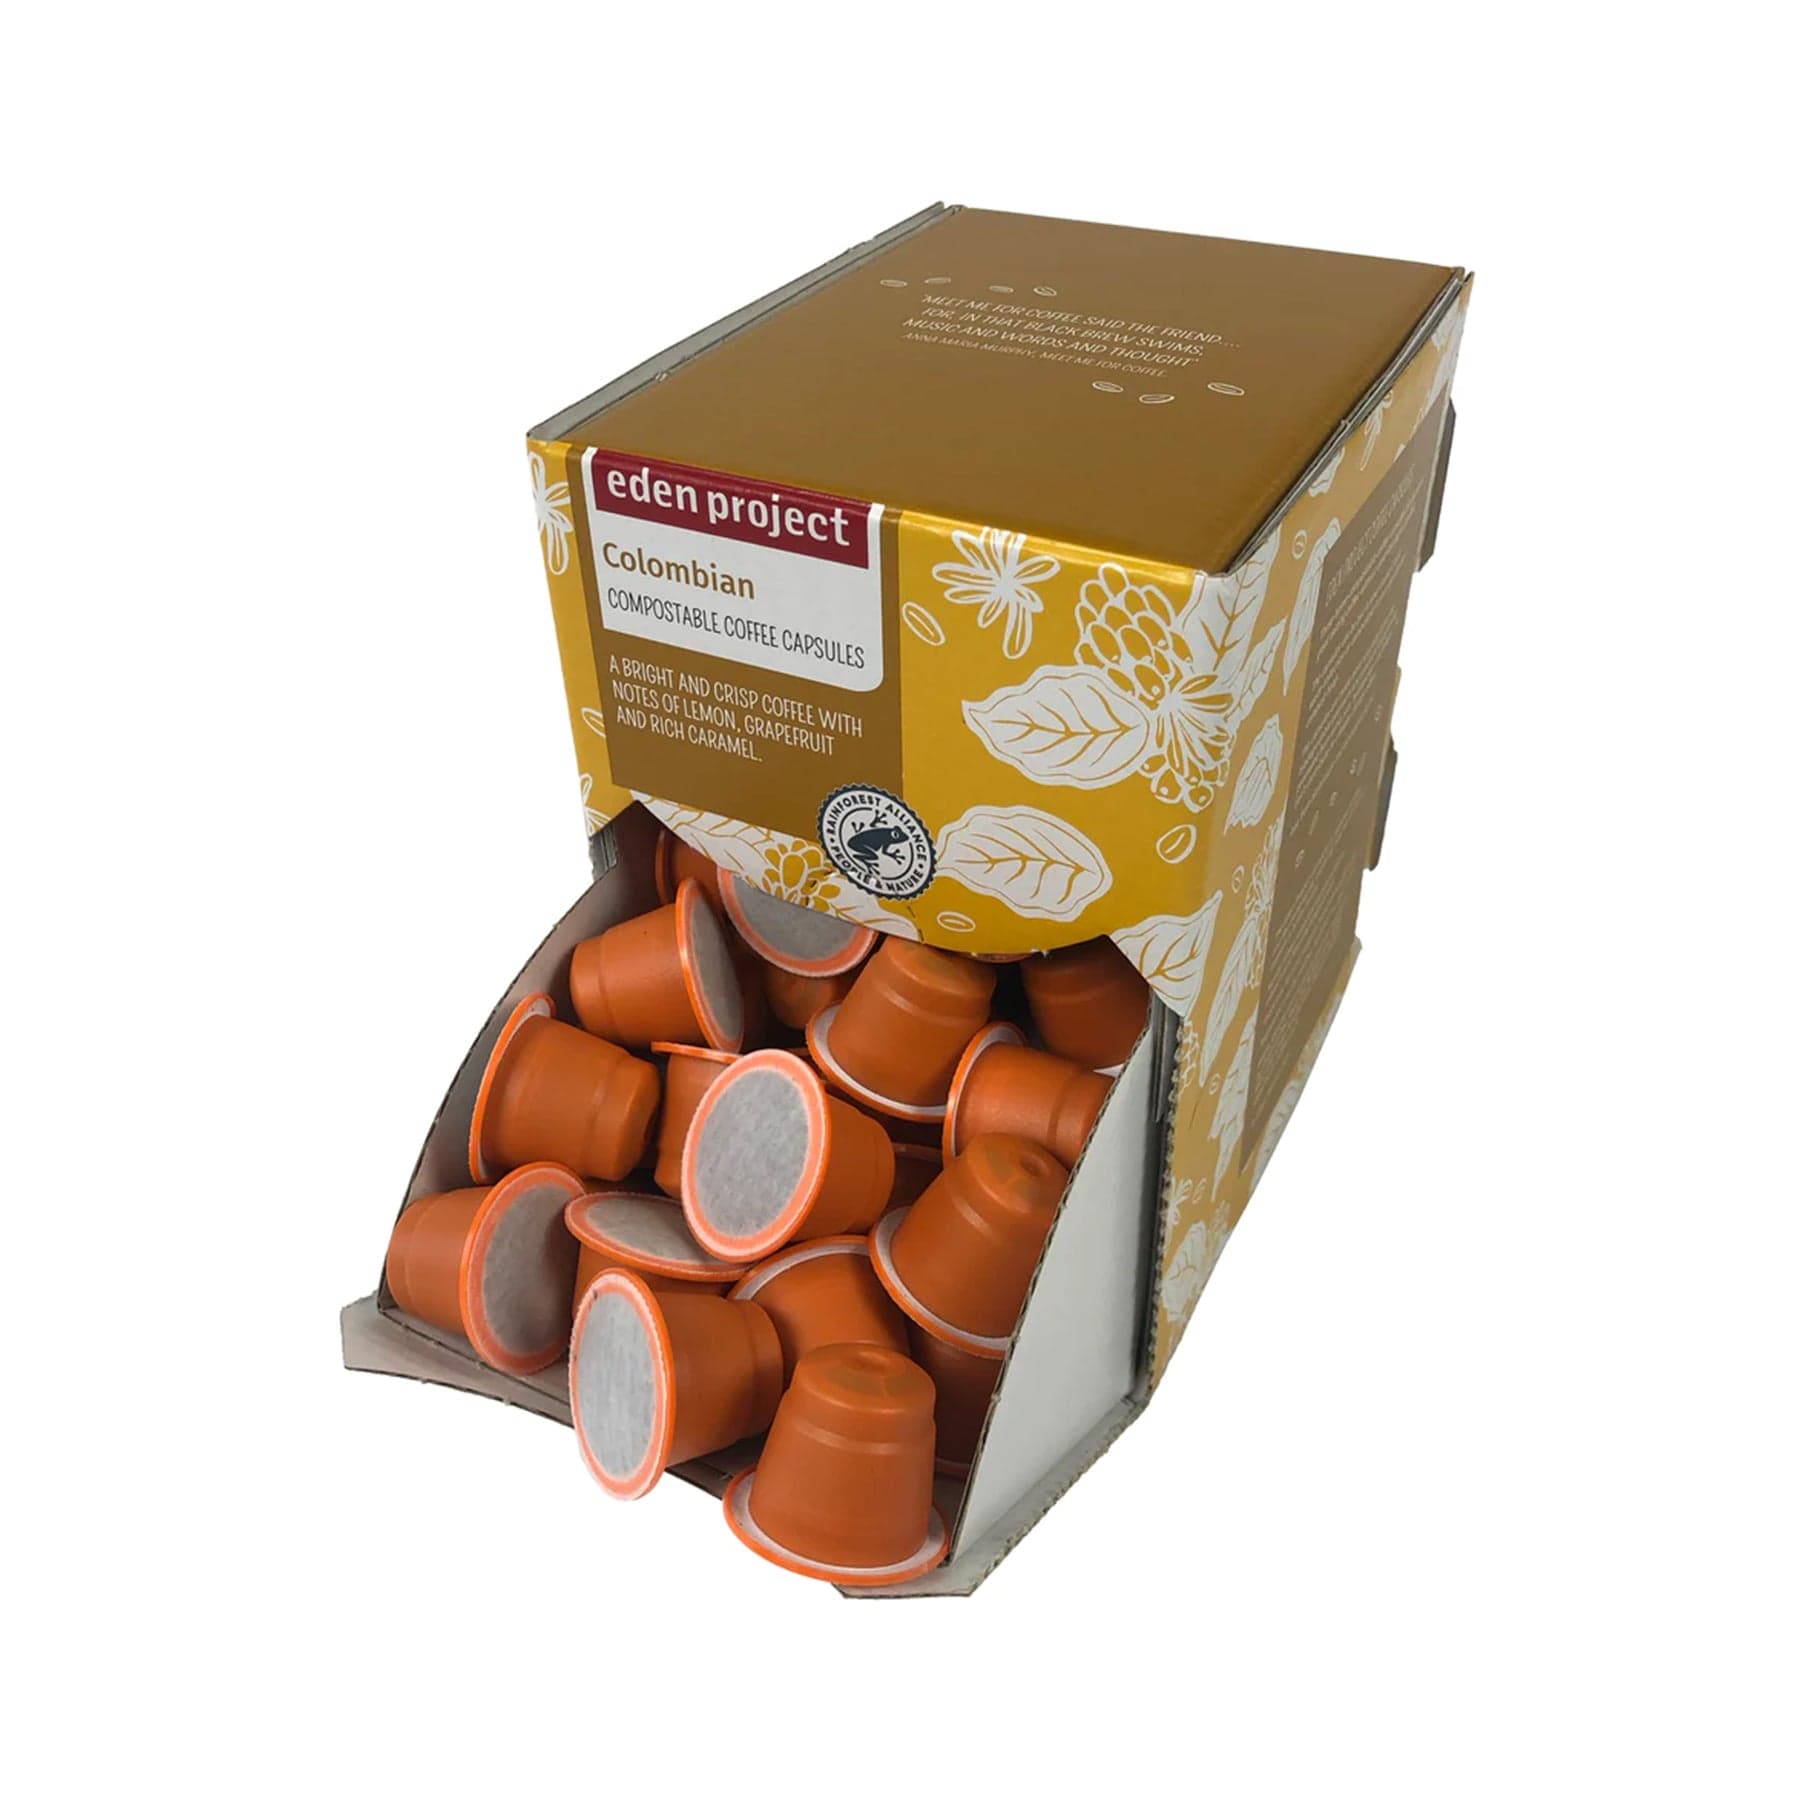 100 Colombian compostable coffee capsules